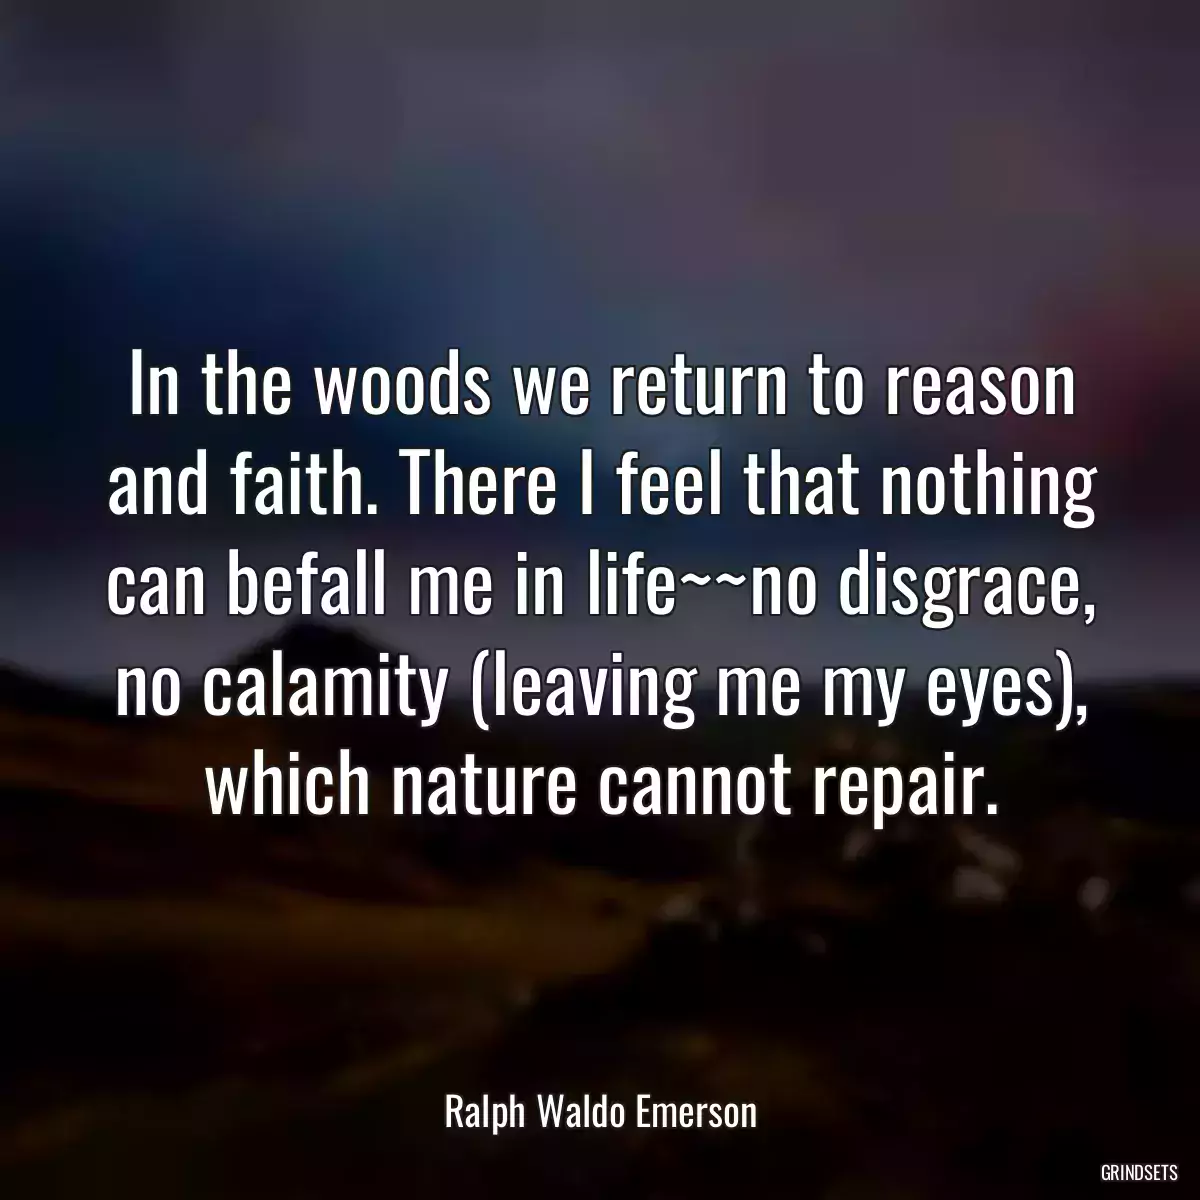 In the woods we return to reason and faith. There I feel that nothing can befall me in life~~no disgrace, no calamity (leaving me my eyes), which nature cannot repair.